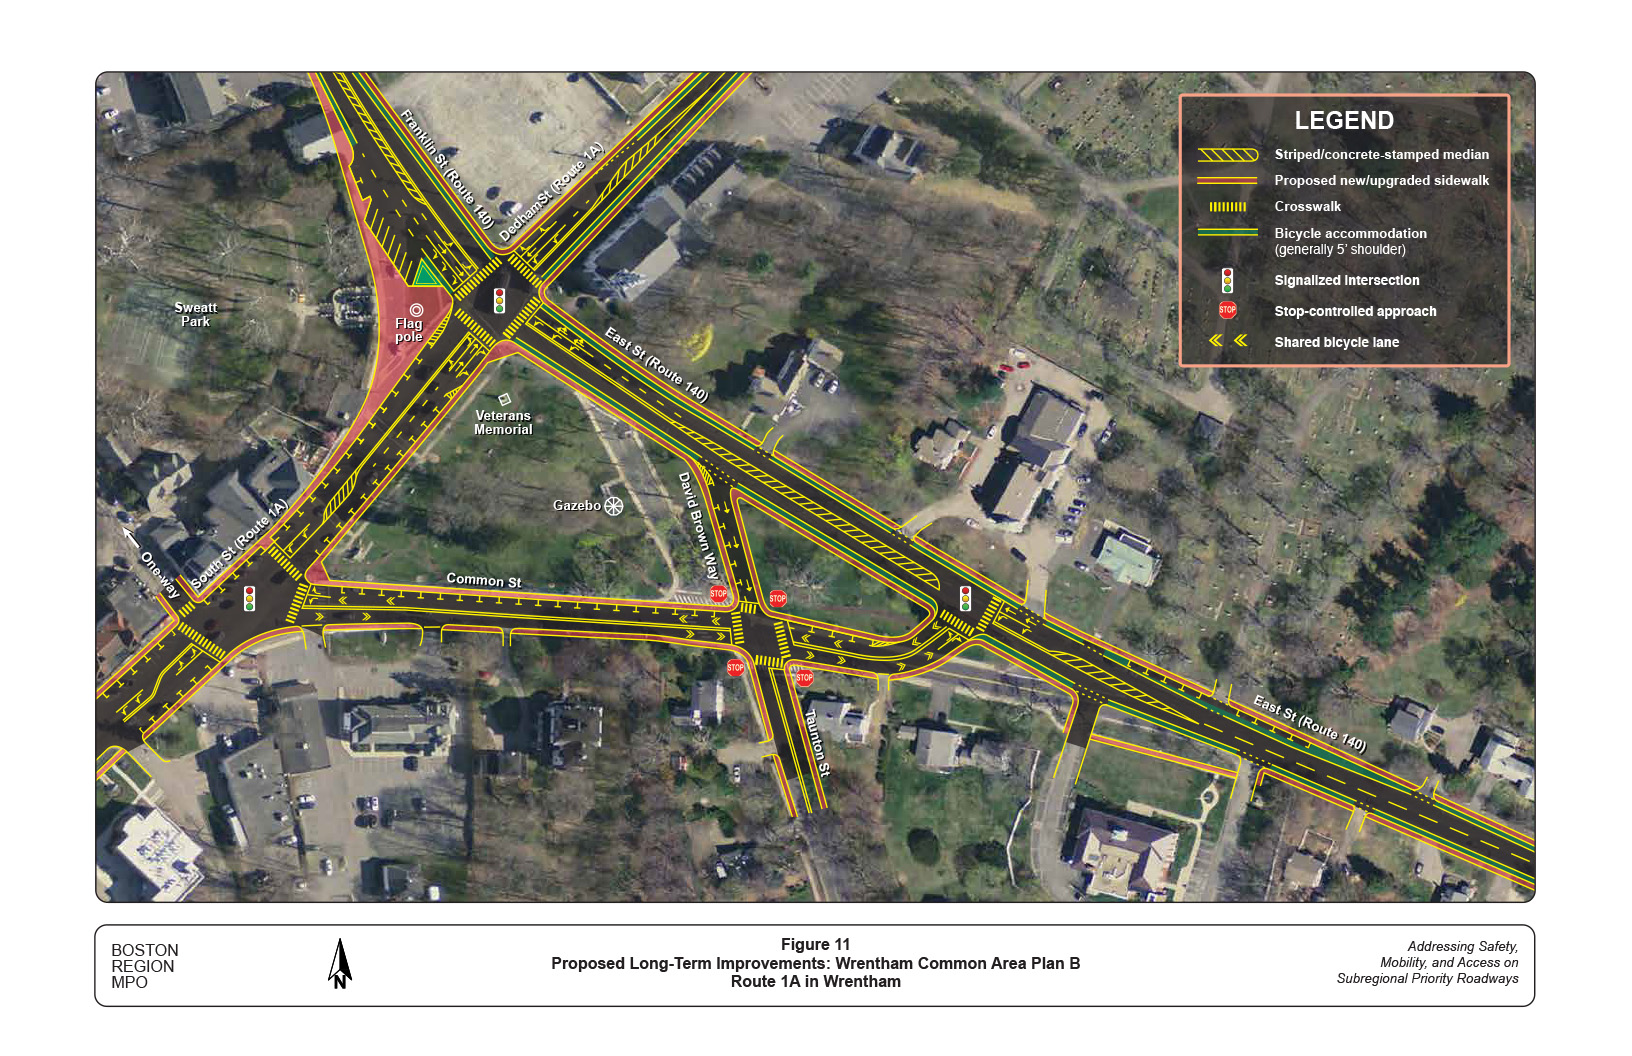 Figure 11 is a map that illustrates the proposed long-term improvements to Route 1A at the Wrentham Common area (Plan B).